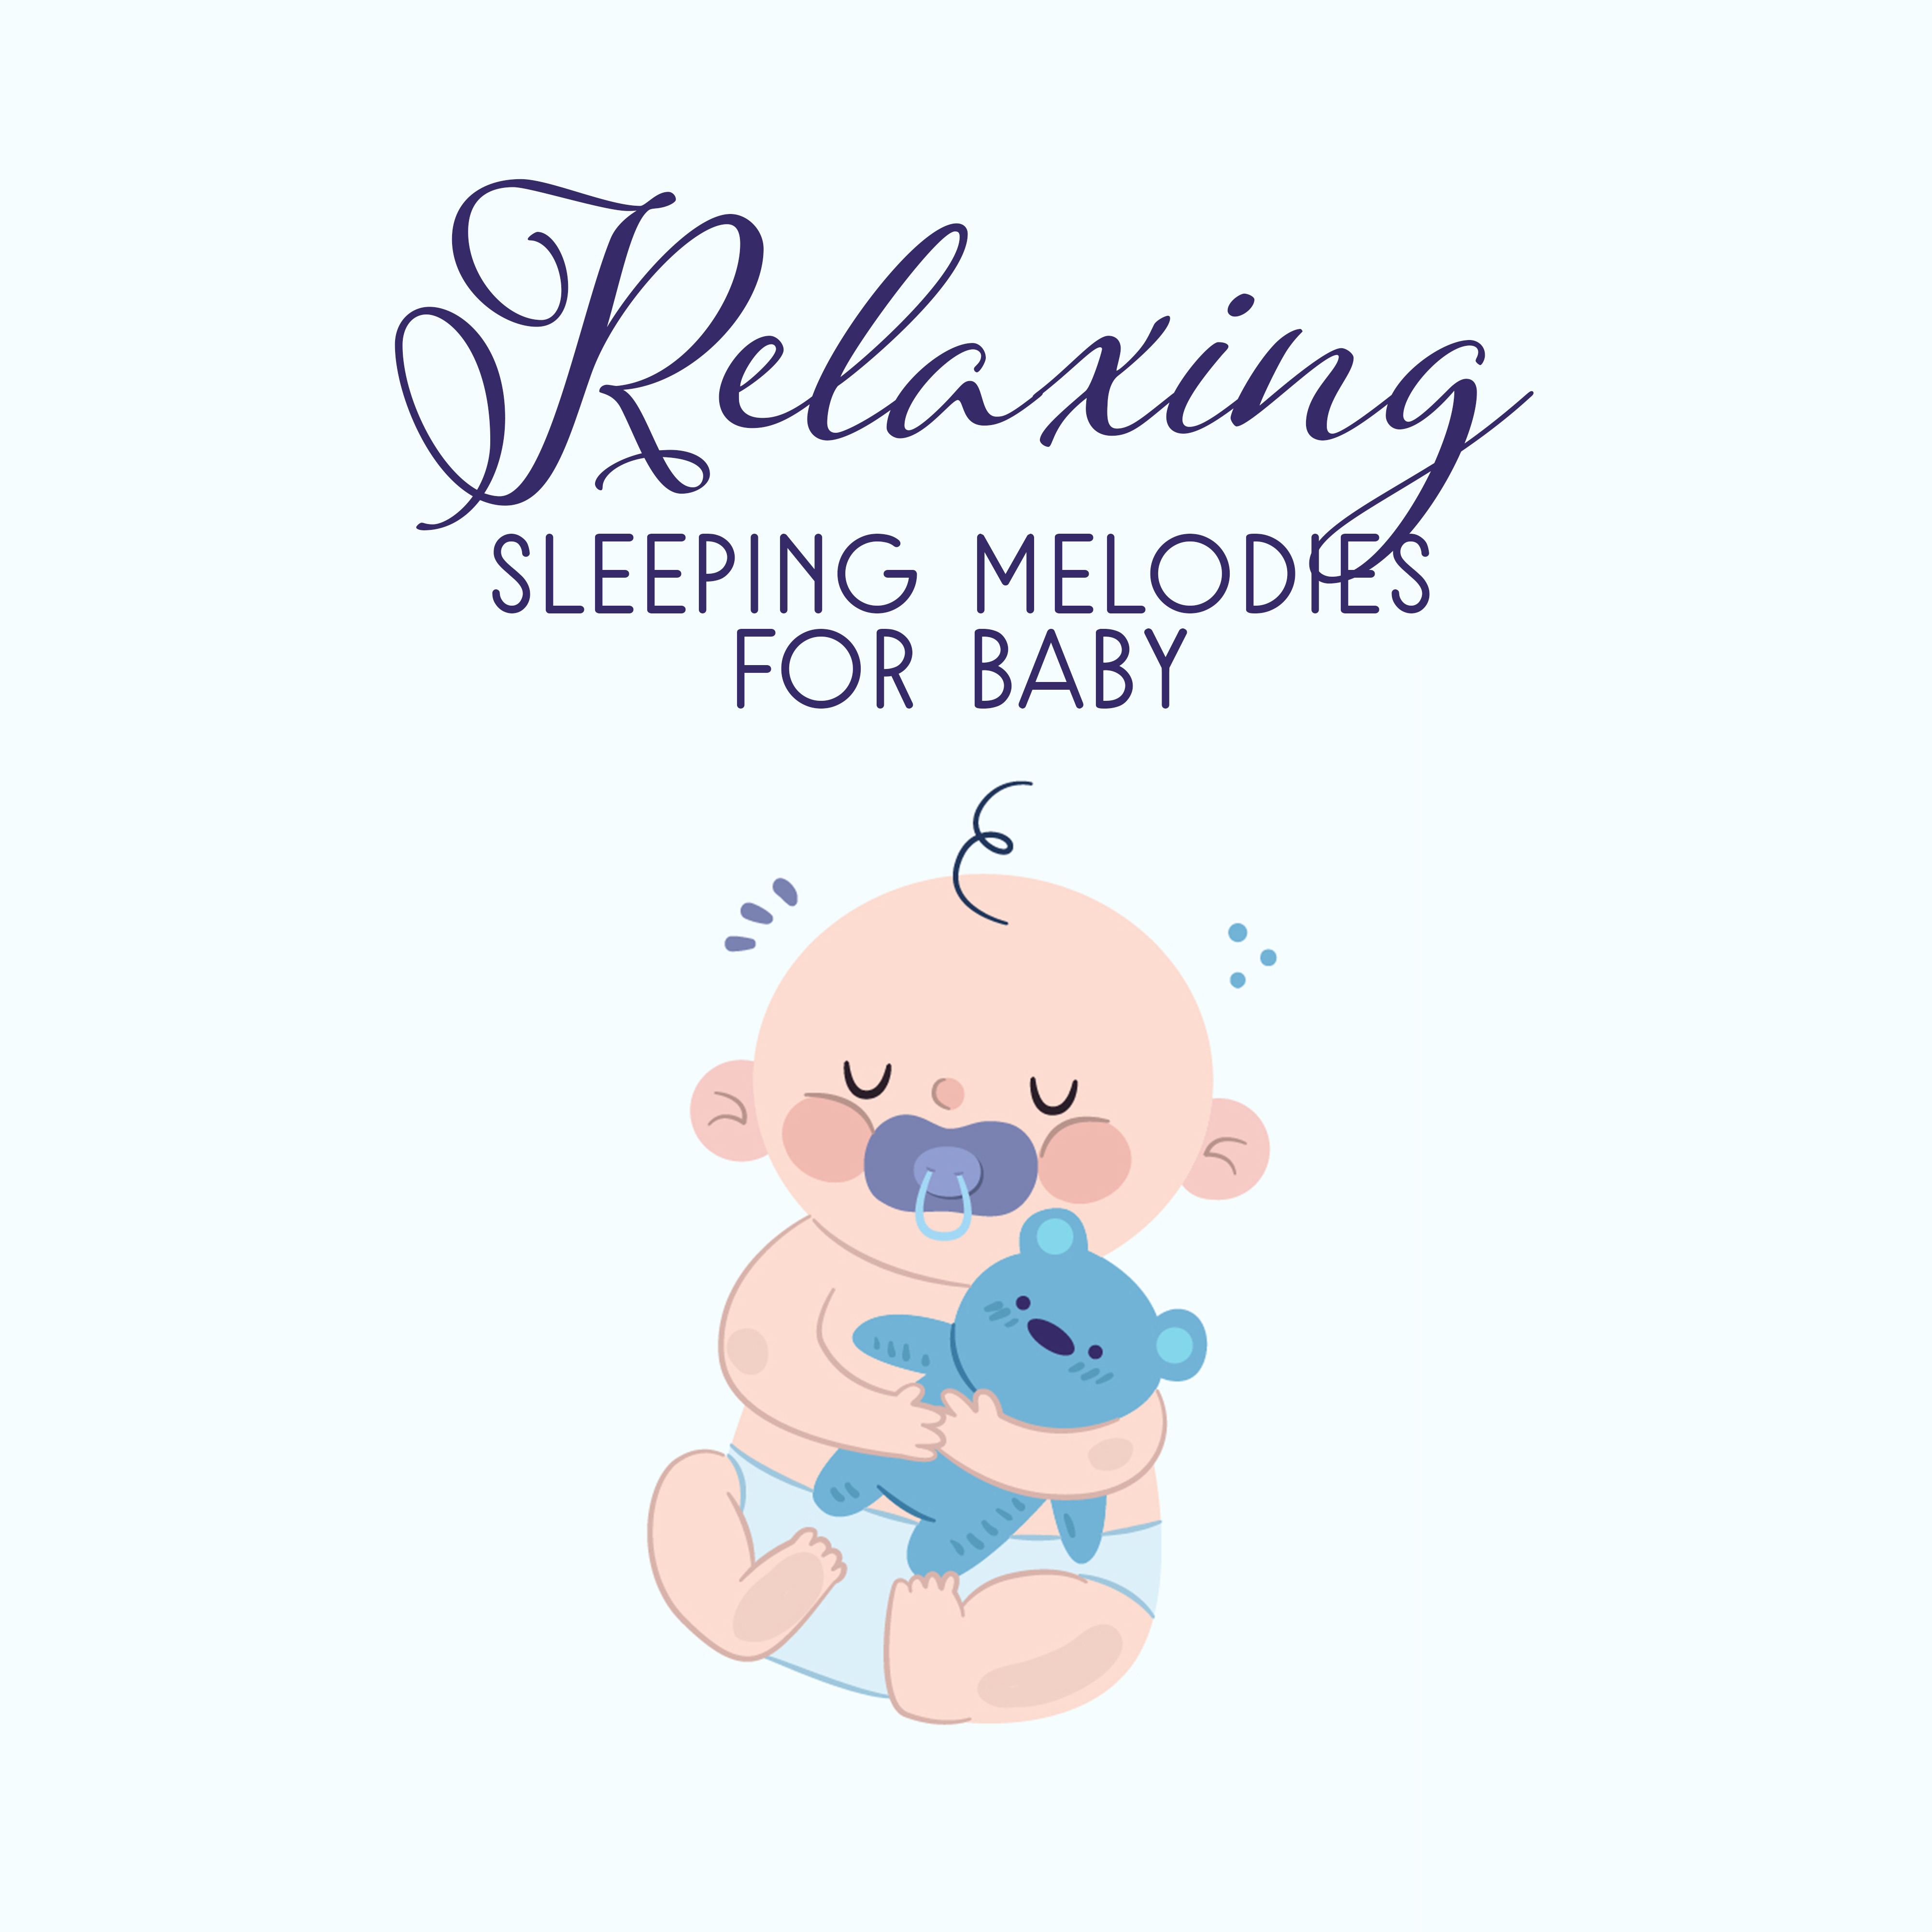 Relaxing Sleeping Melodies for Baby